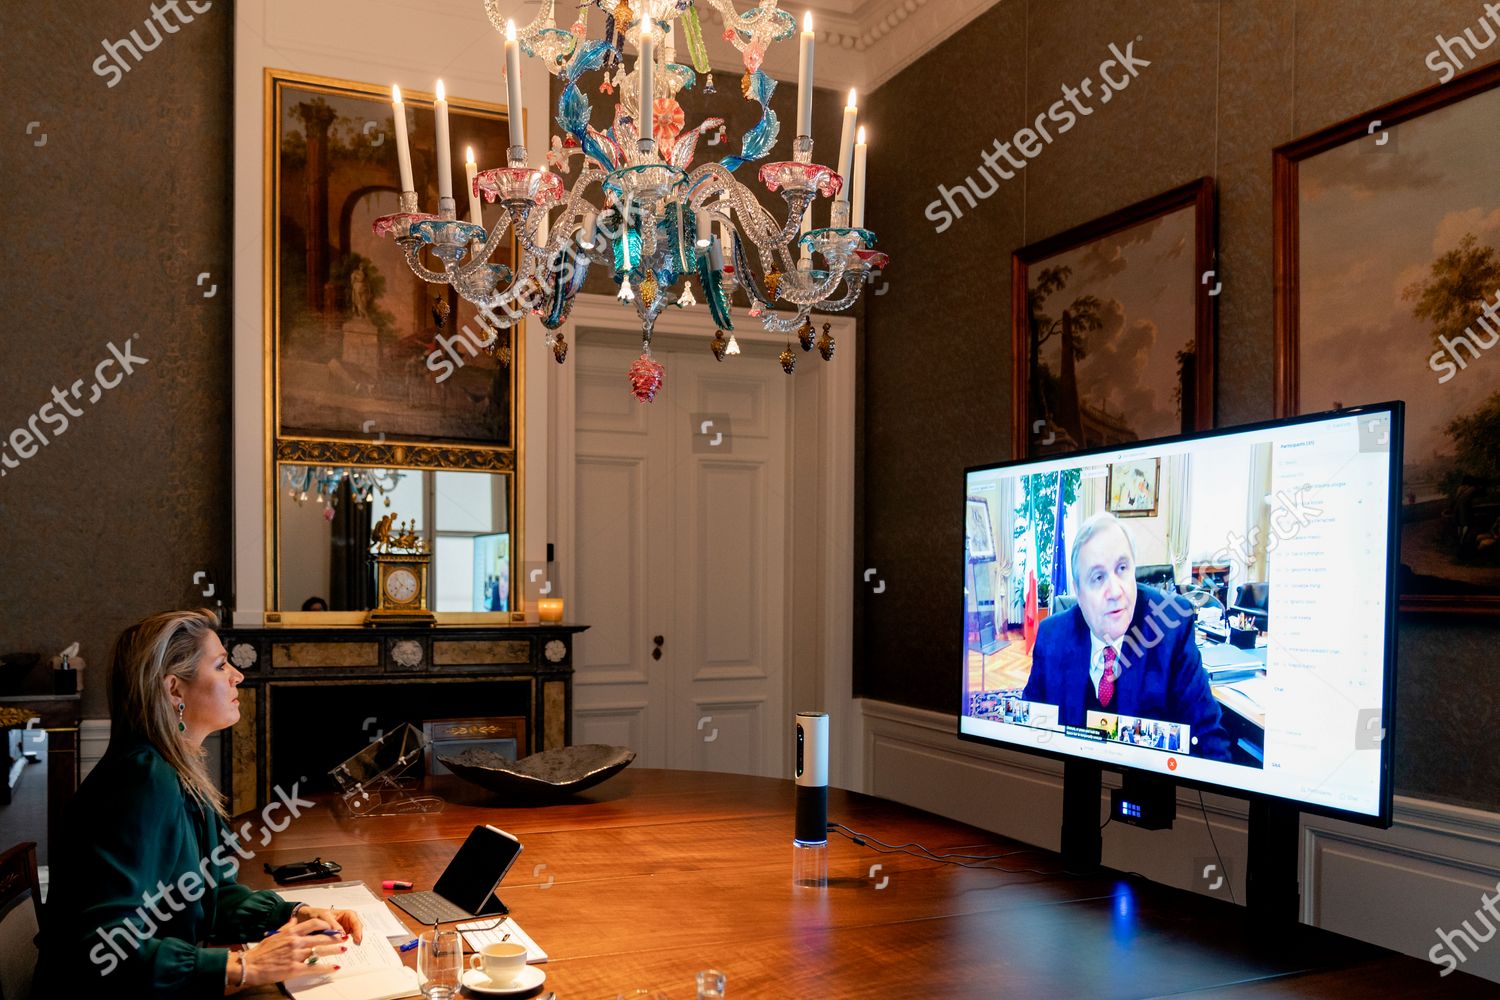 queen-maxima-video-conference-the-hague-the-netherlands-shutterstock-editorial-11086765a.jpg